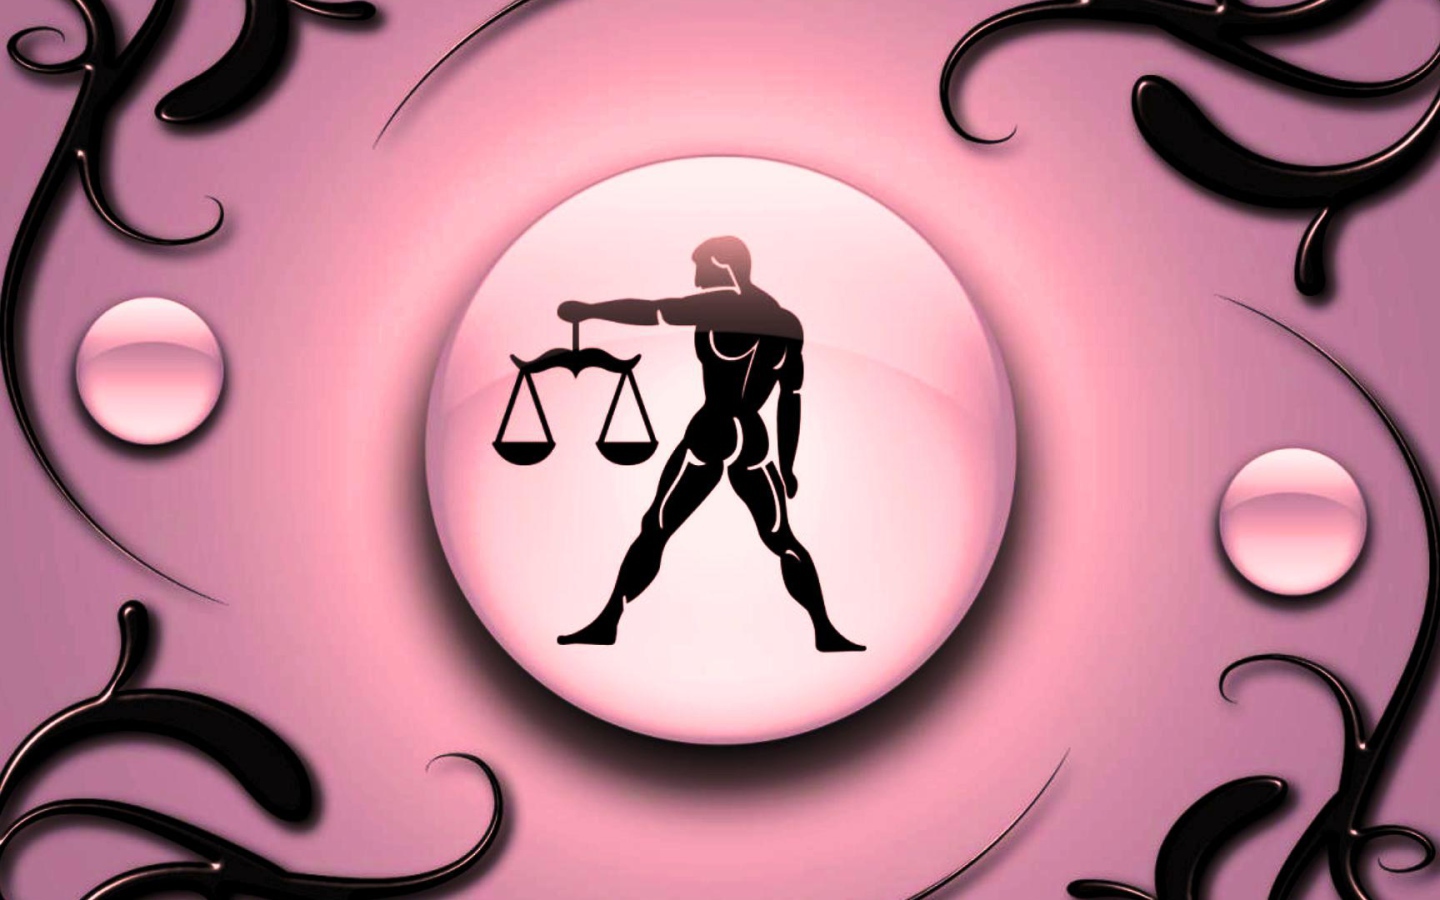 Libra on a pink background with black ornament